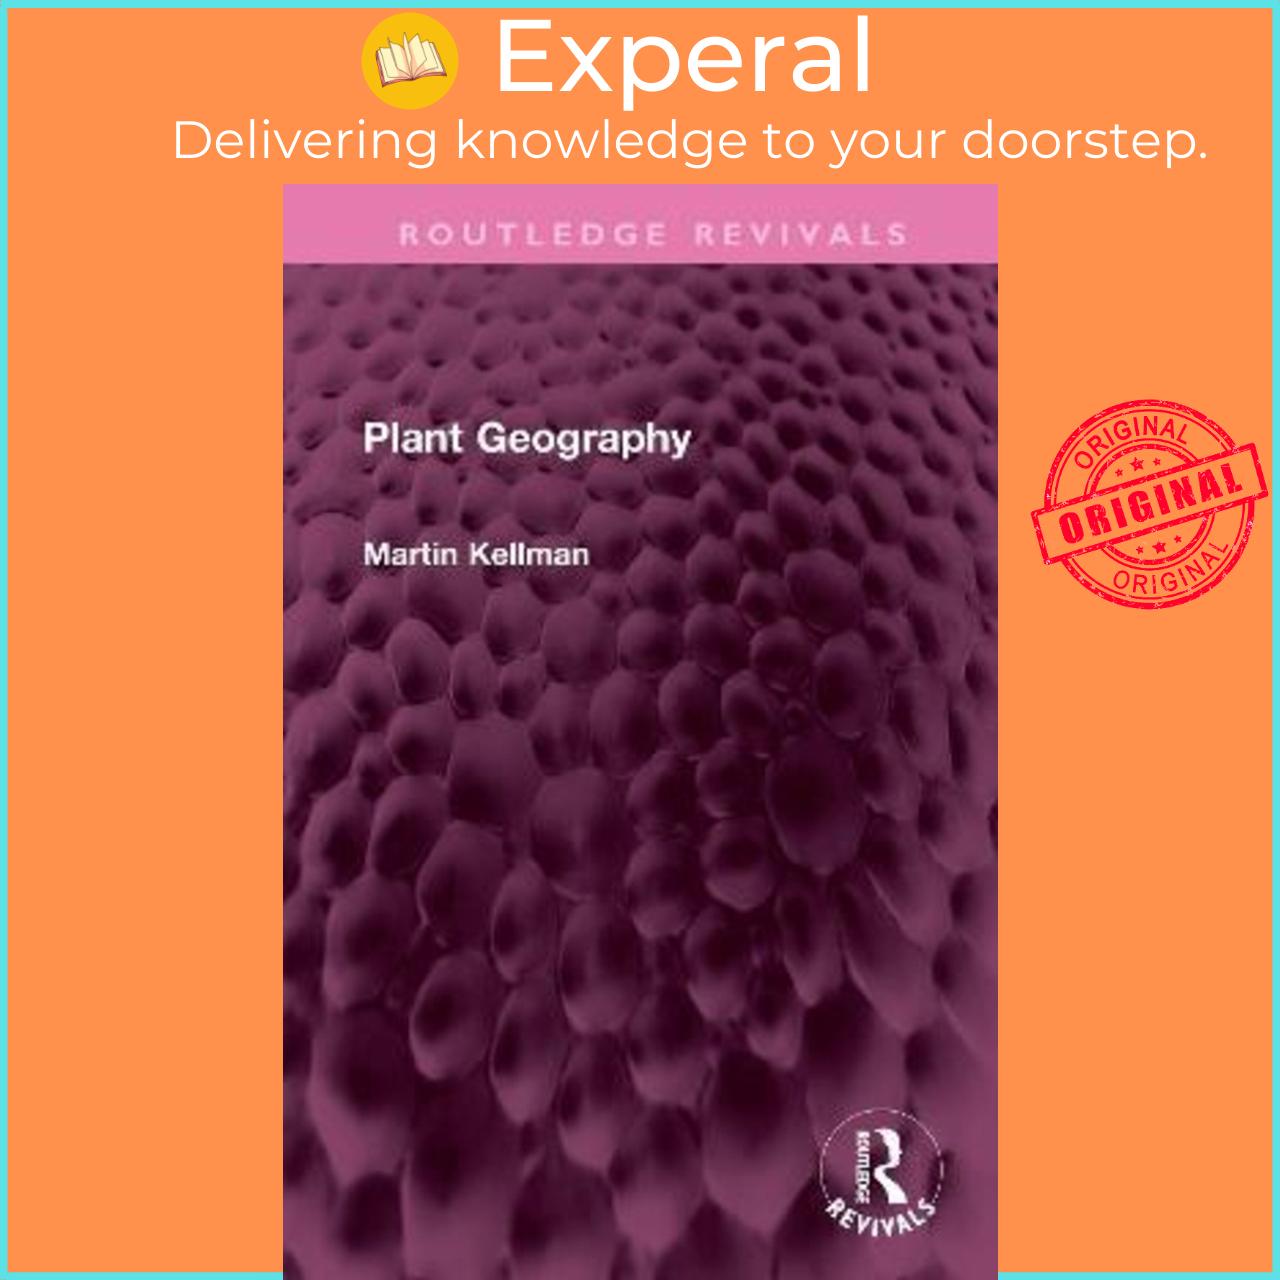 Sách - Plant Geography by Martin Kellman (UK edition, hardcover)